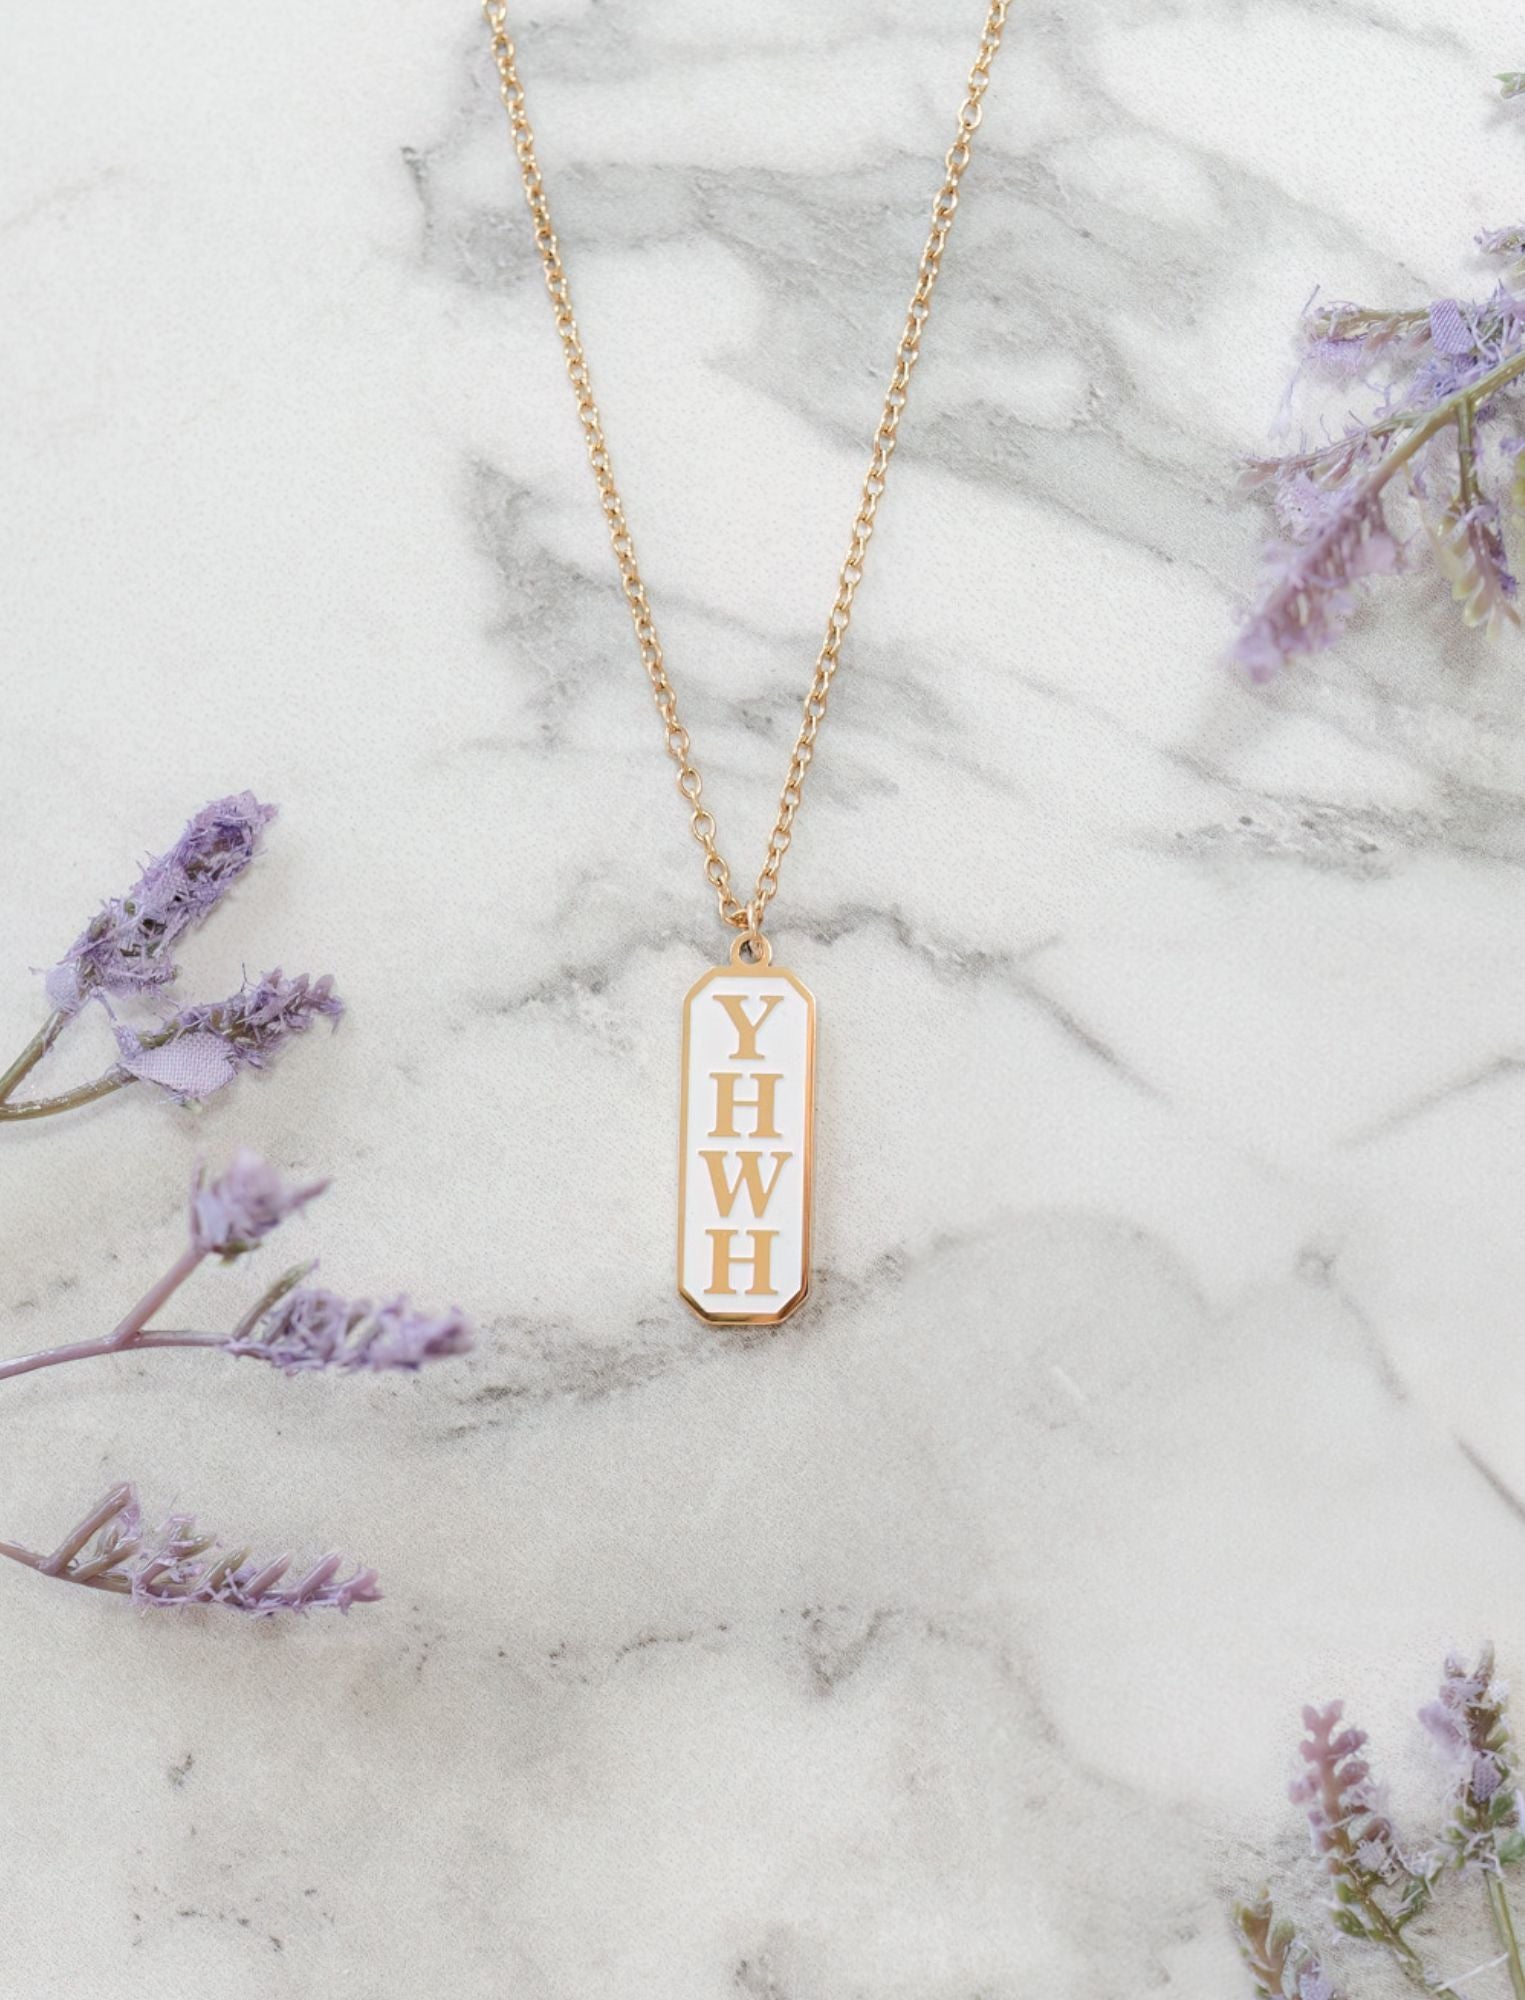 Necklace: YHWH